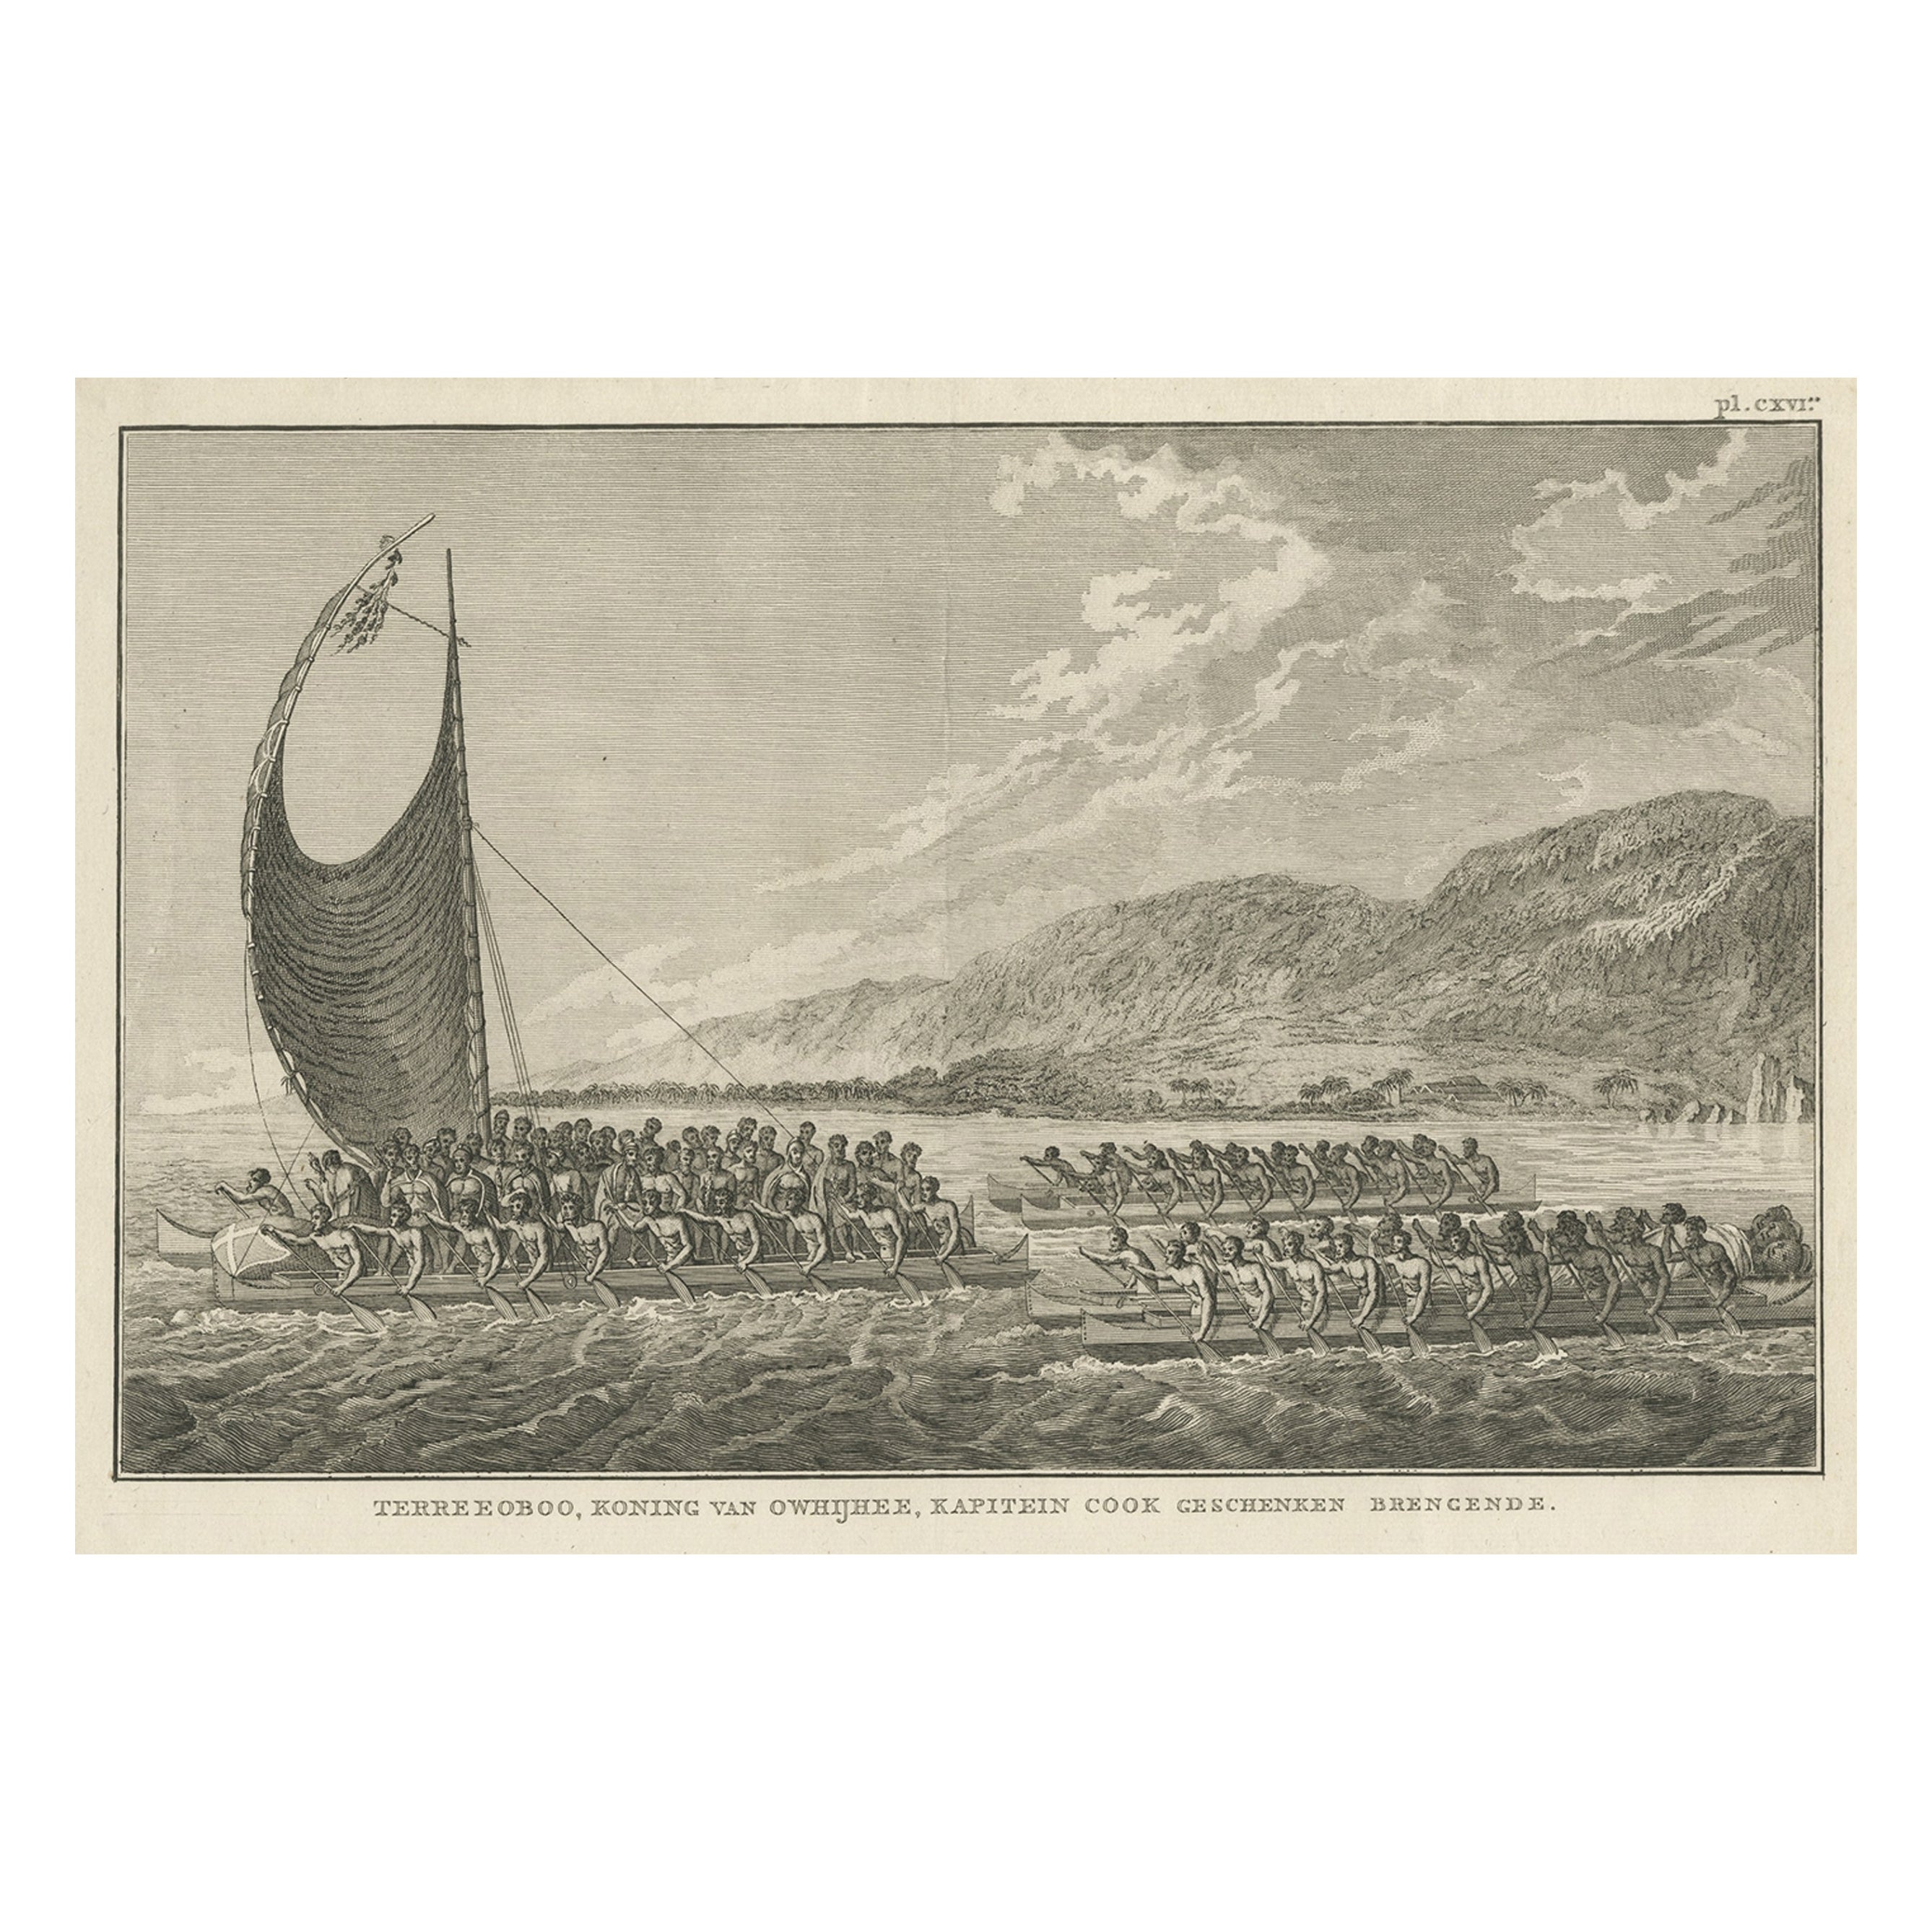 The King of Owyhee, Sandwich Isles 'Hawaii' with Gifts for Captain Cook, 1803 For Sale